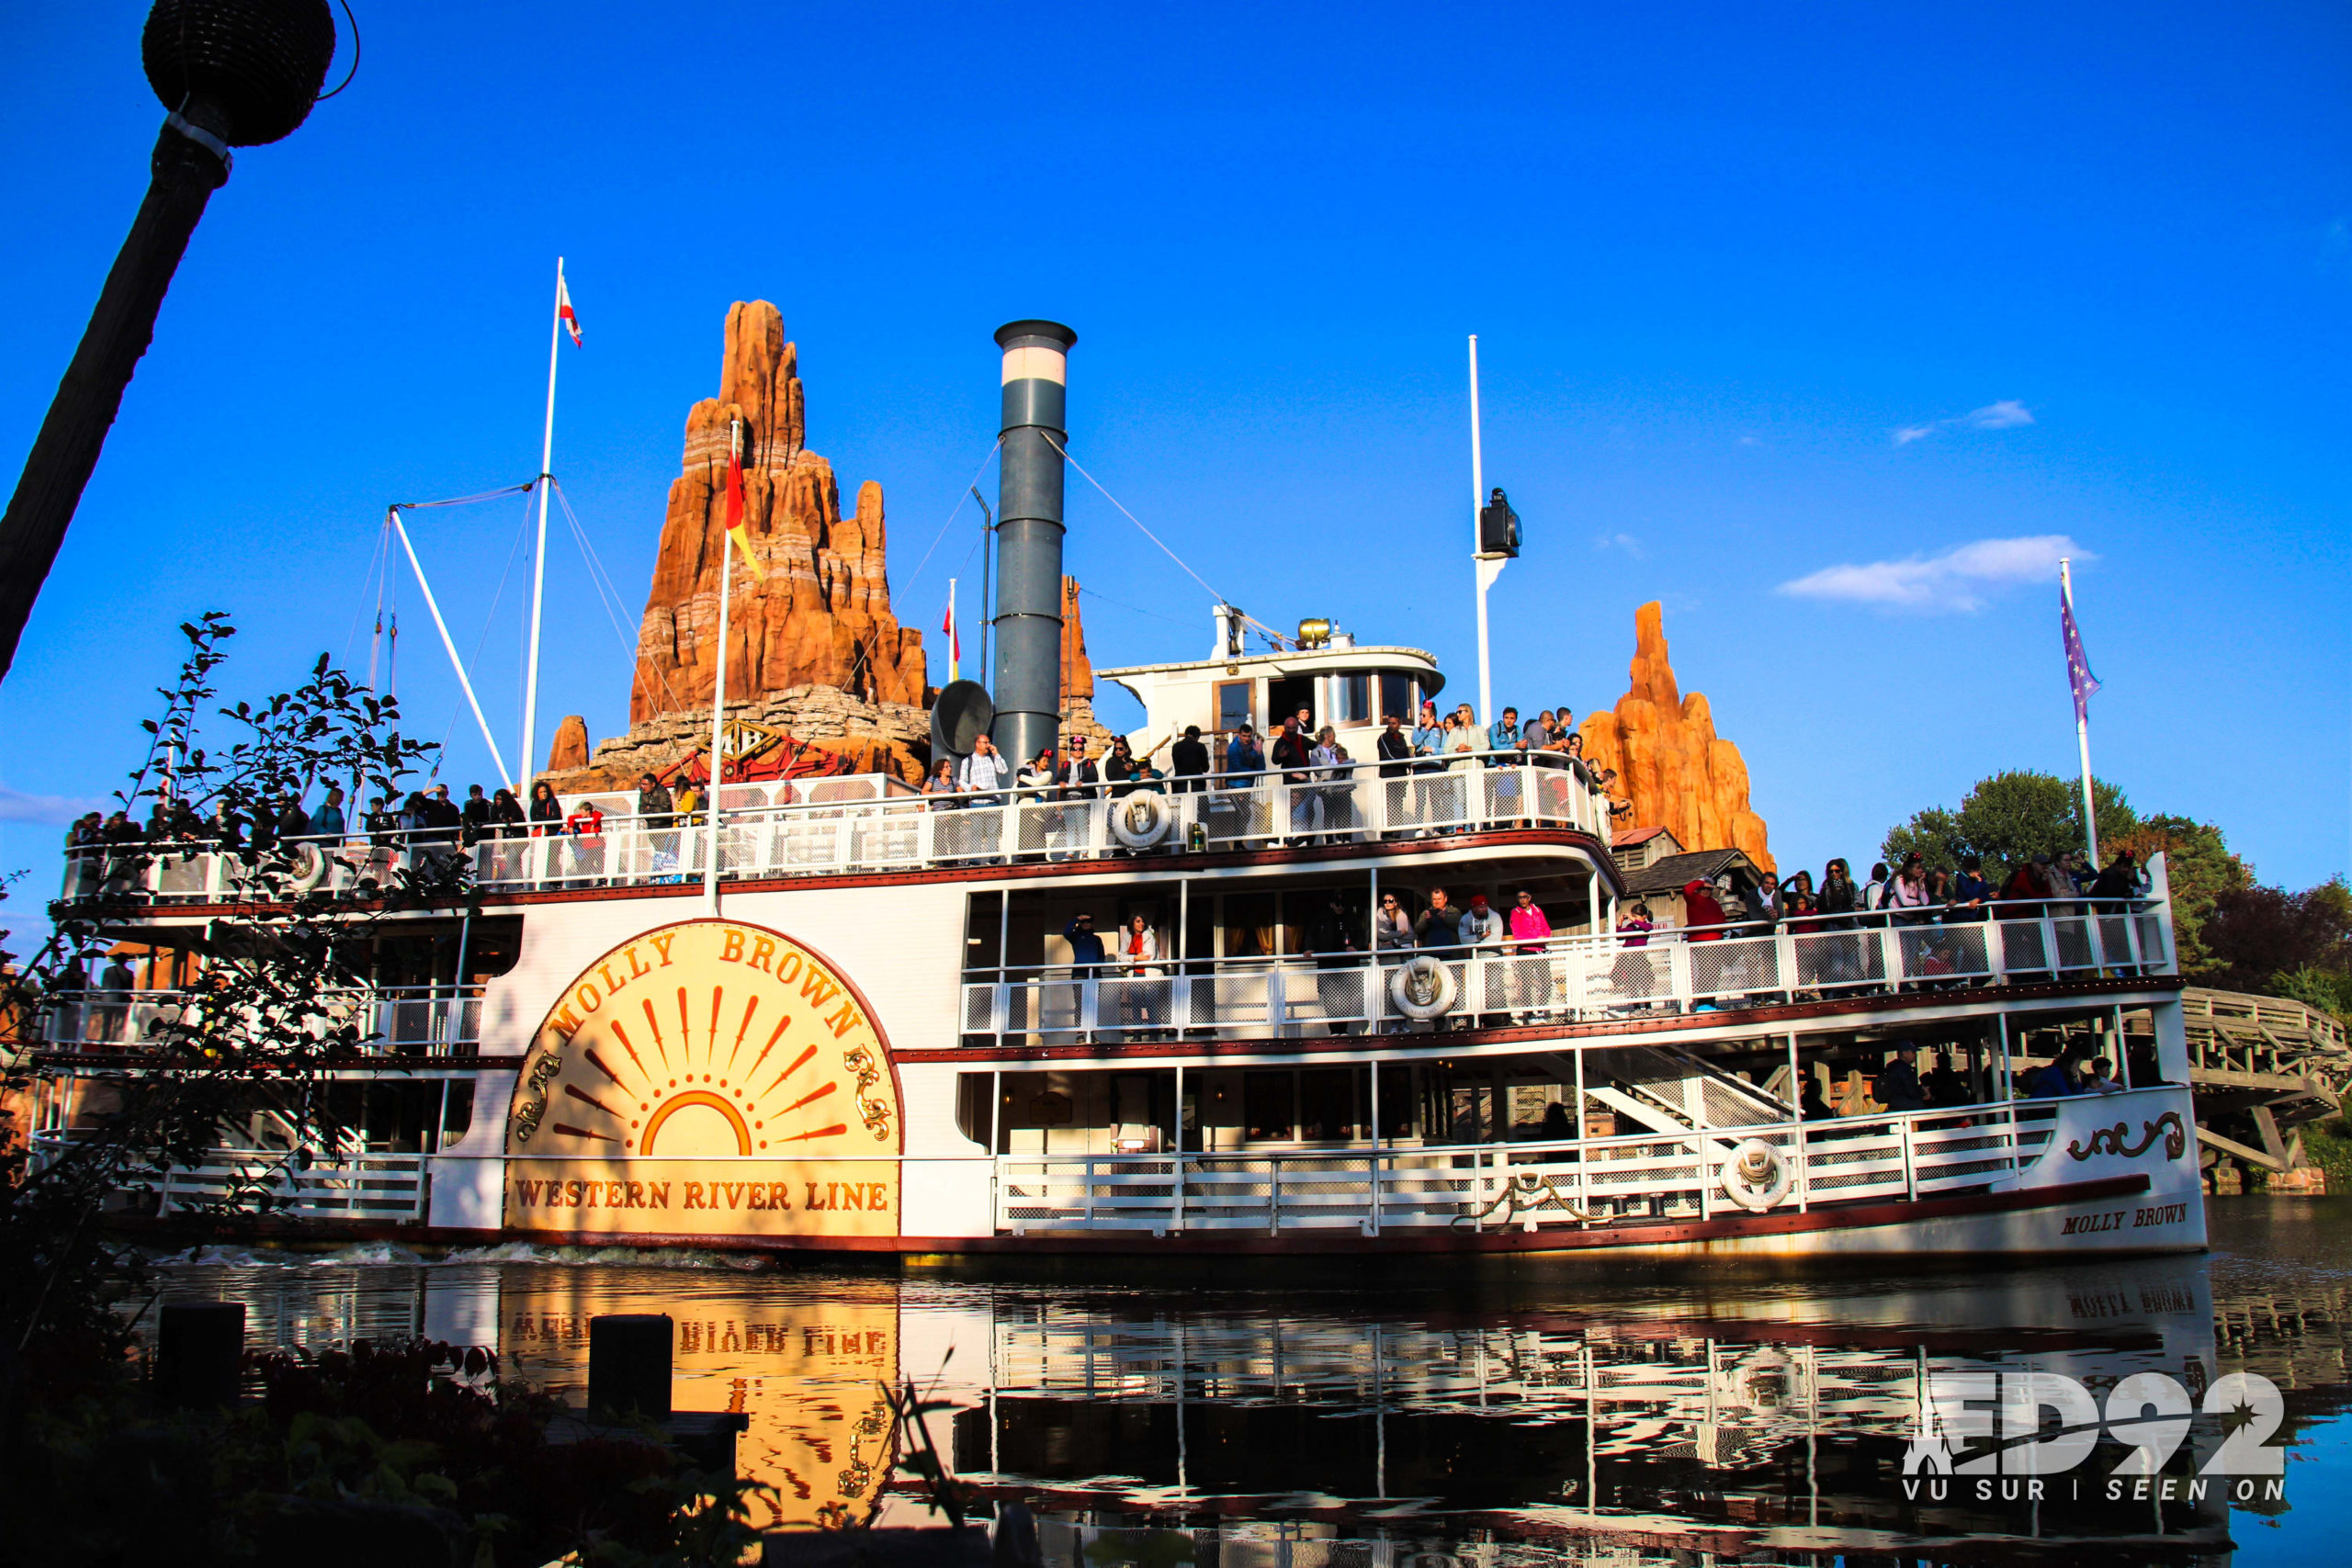 The Molly Brown sails